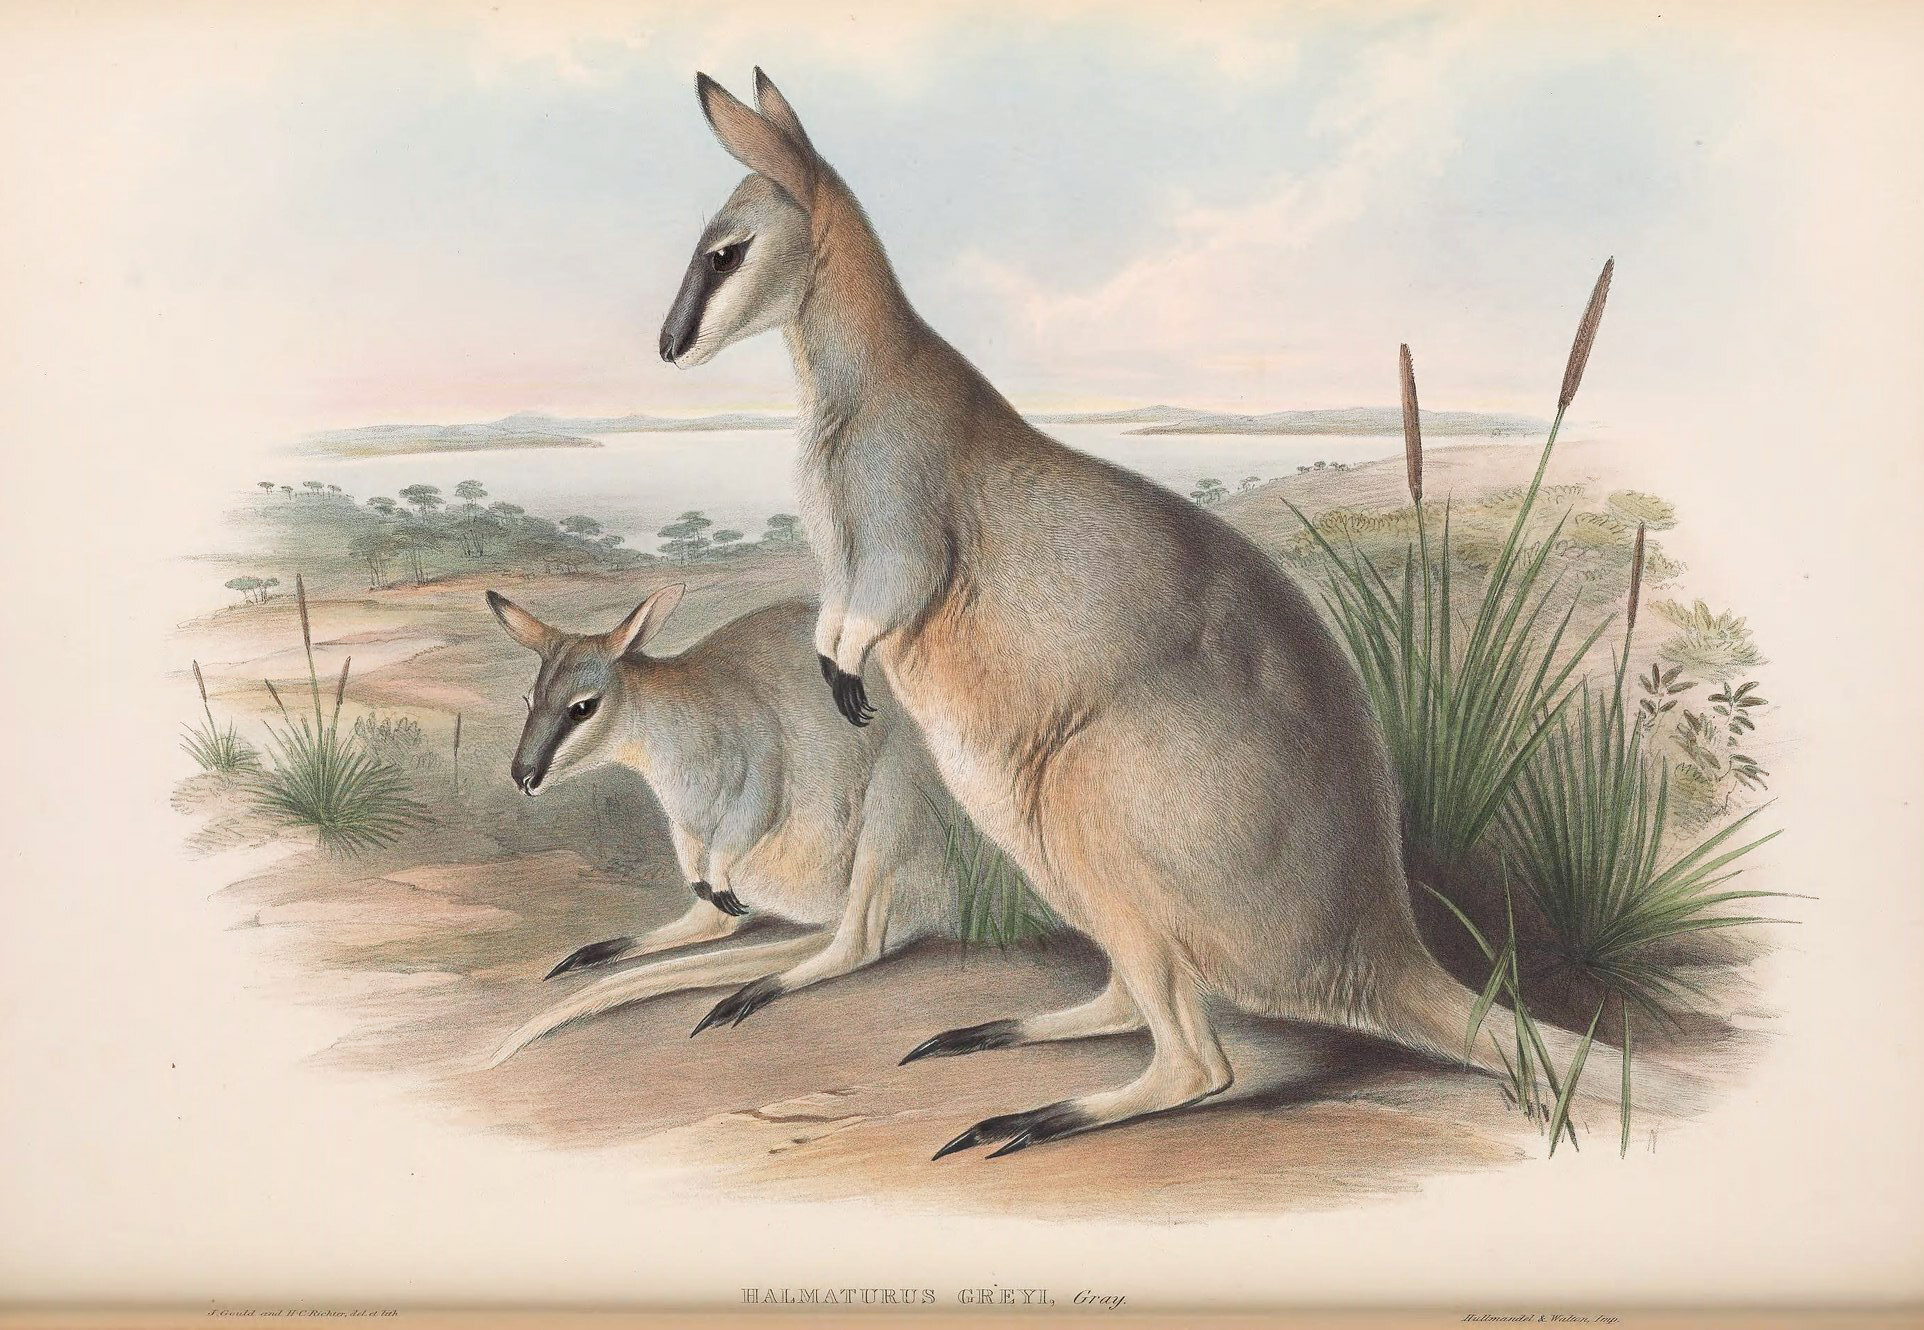 What is missing? | Crescent Nail-tail Wallaby